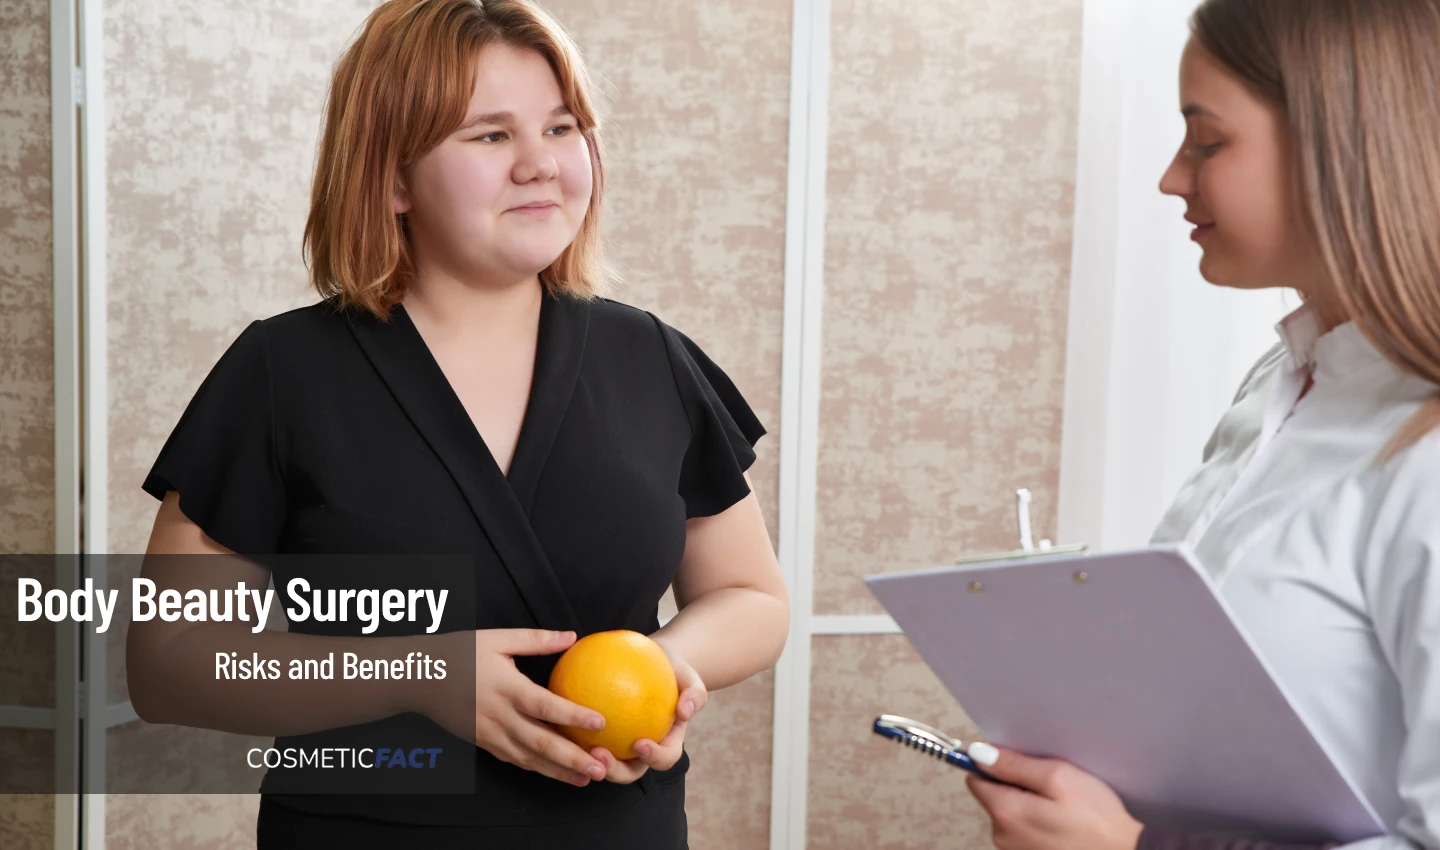 A woman is seen discussing the risks and benefits of body cosmetic surgery with her doctor.